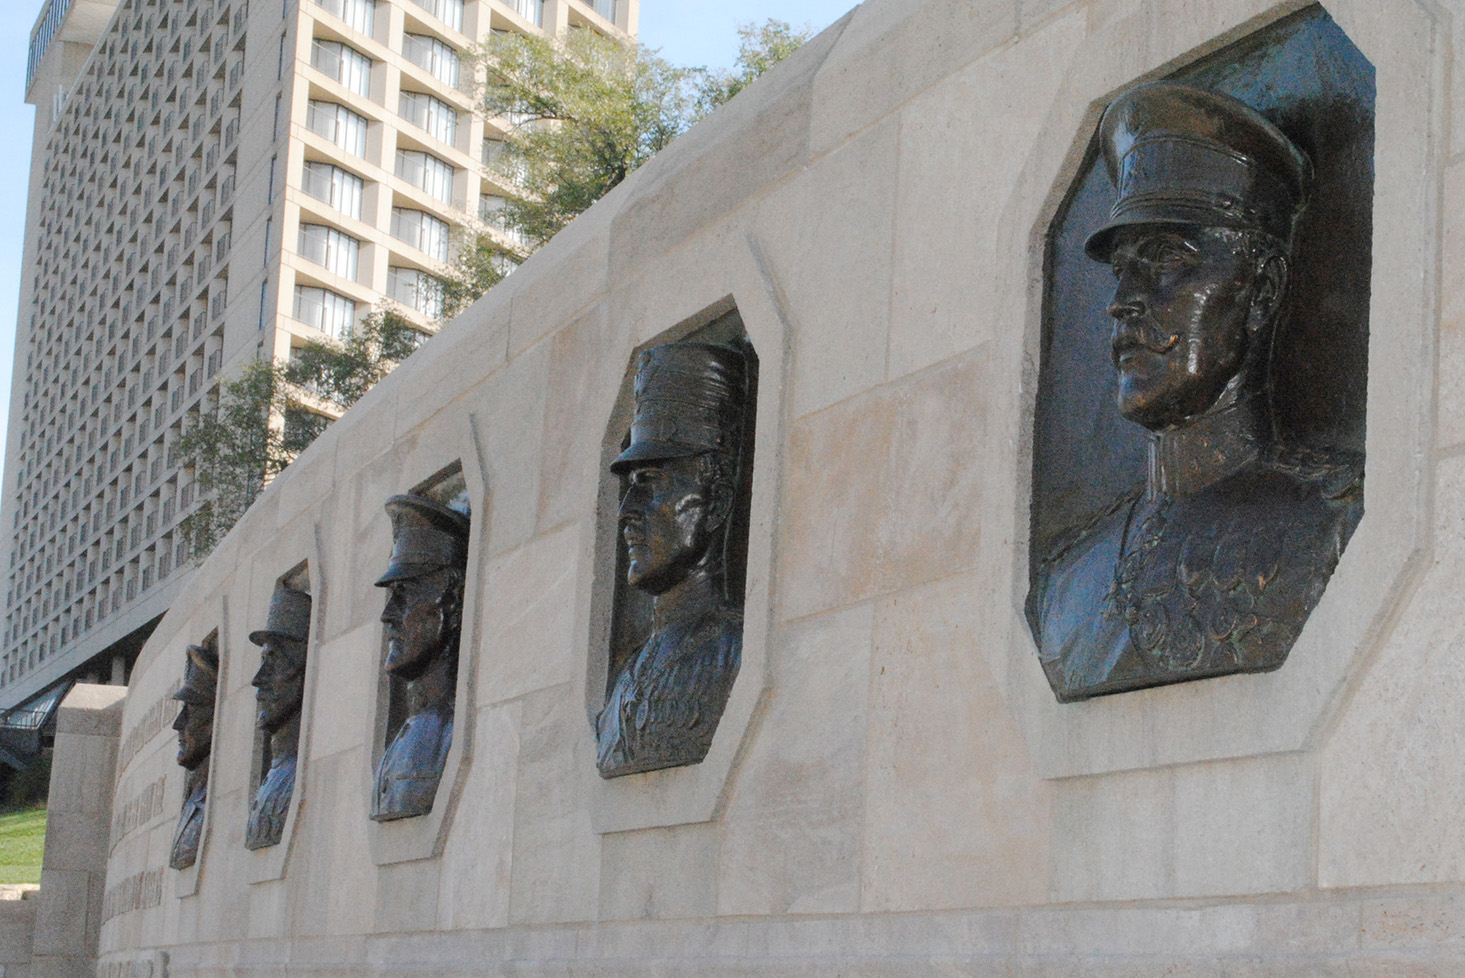 Angled view of a stone wall with five bronze bas-relief portraits of five generals.